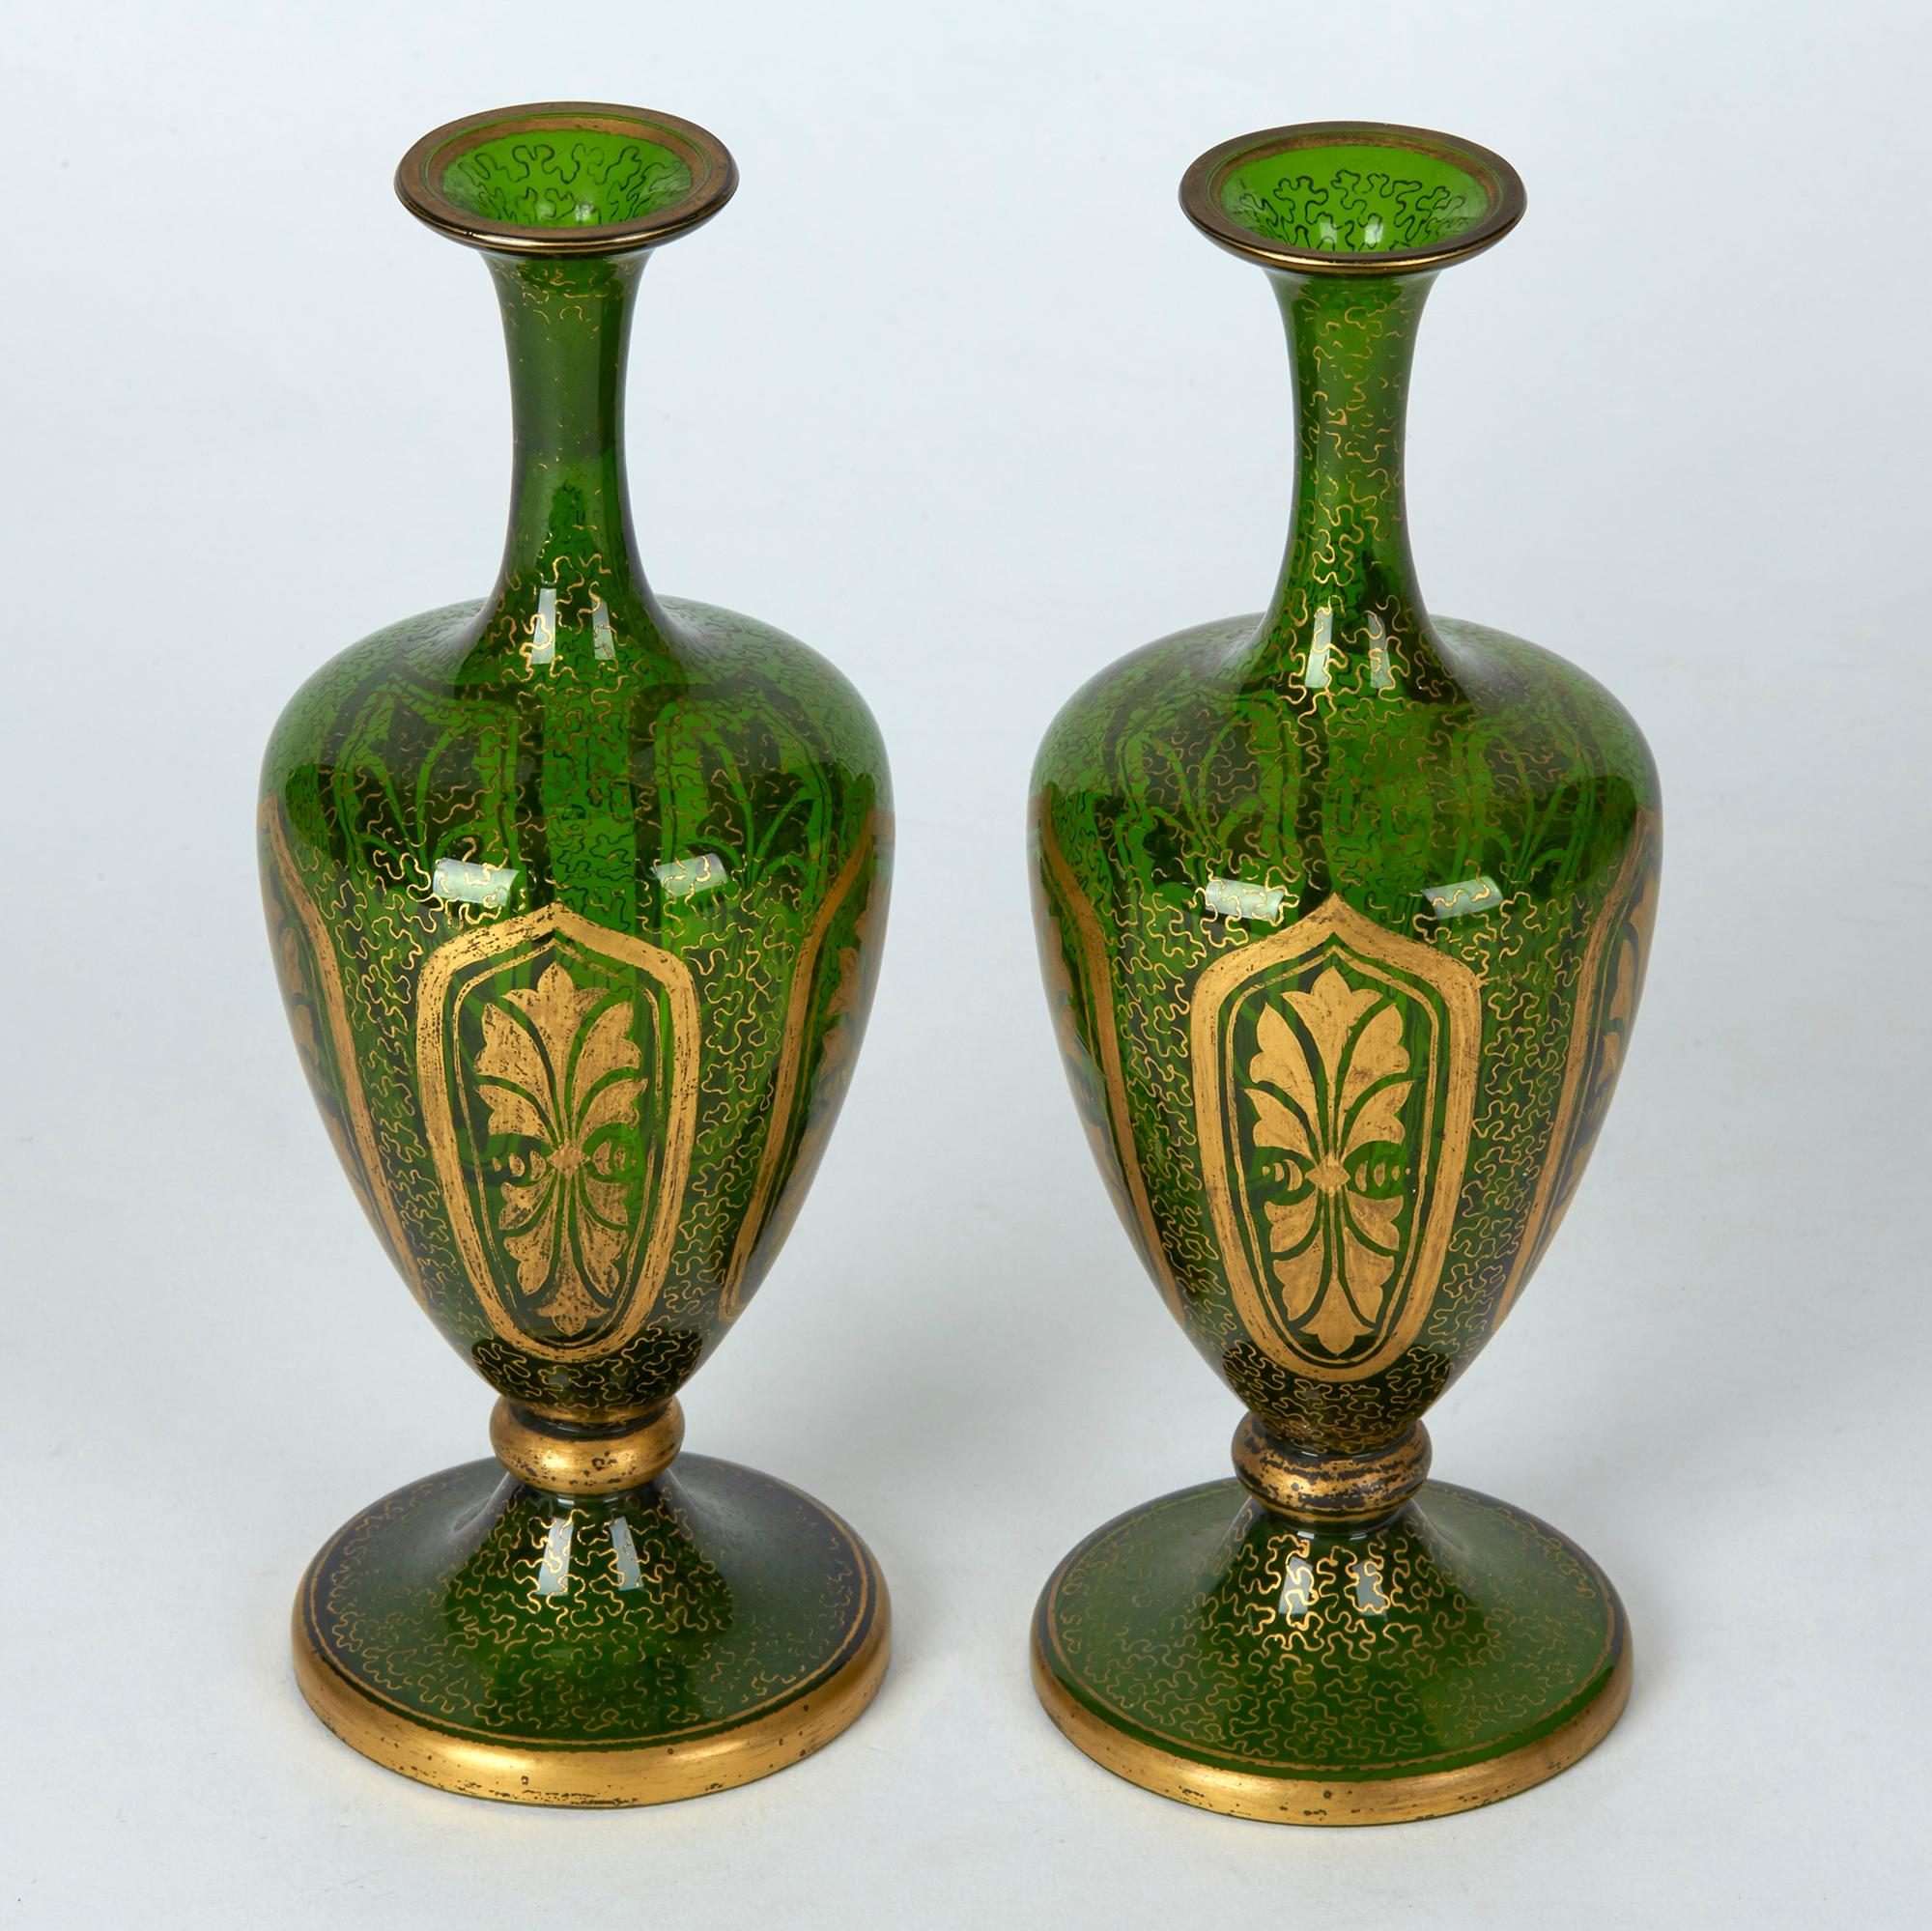 A very fine antique pair Bohemian green glass vases decorating with gilding, possibly Moser dating from the latter 19th century. The beautifully made vases stand on a rounded pedestal base with knop stem supporting a pear shaped body with tall